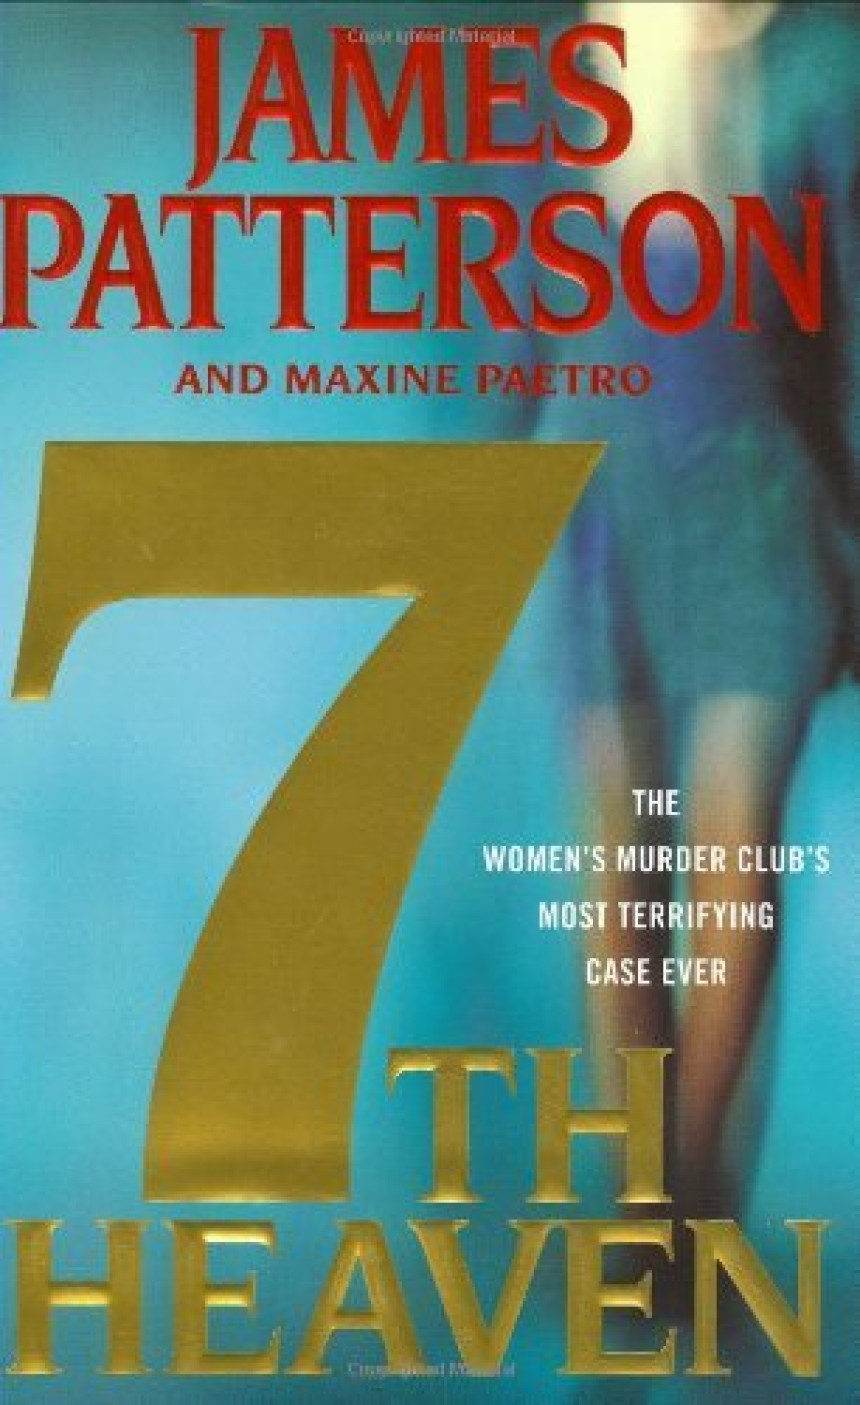 Free Download Women's Murder Club #7 7th Heaven by James Patterson ,  Maxine Paetro